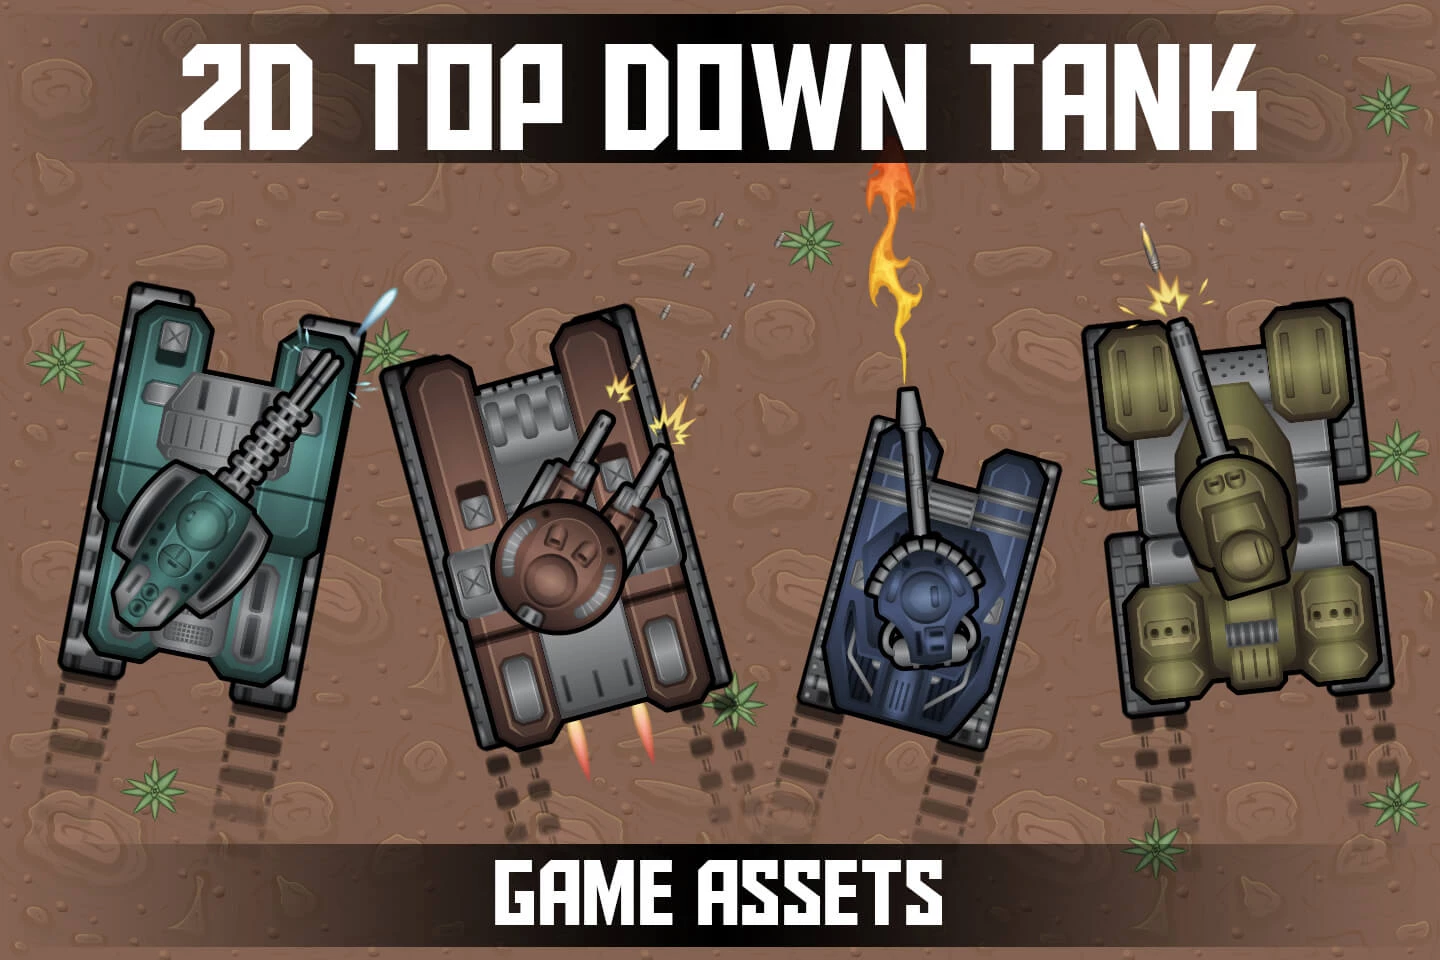 Top down FREE game assets - army camp - 2dgameartguru Free assets